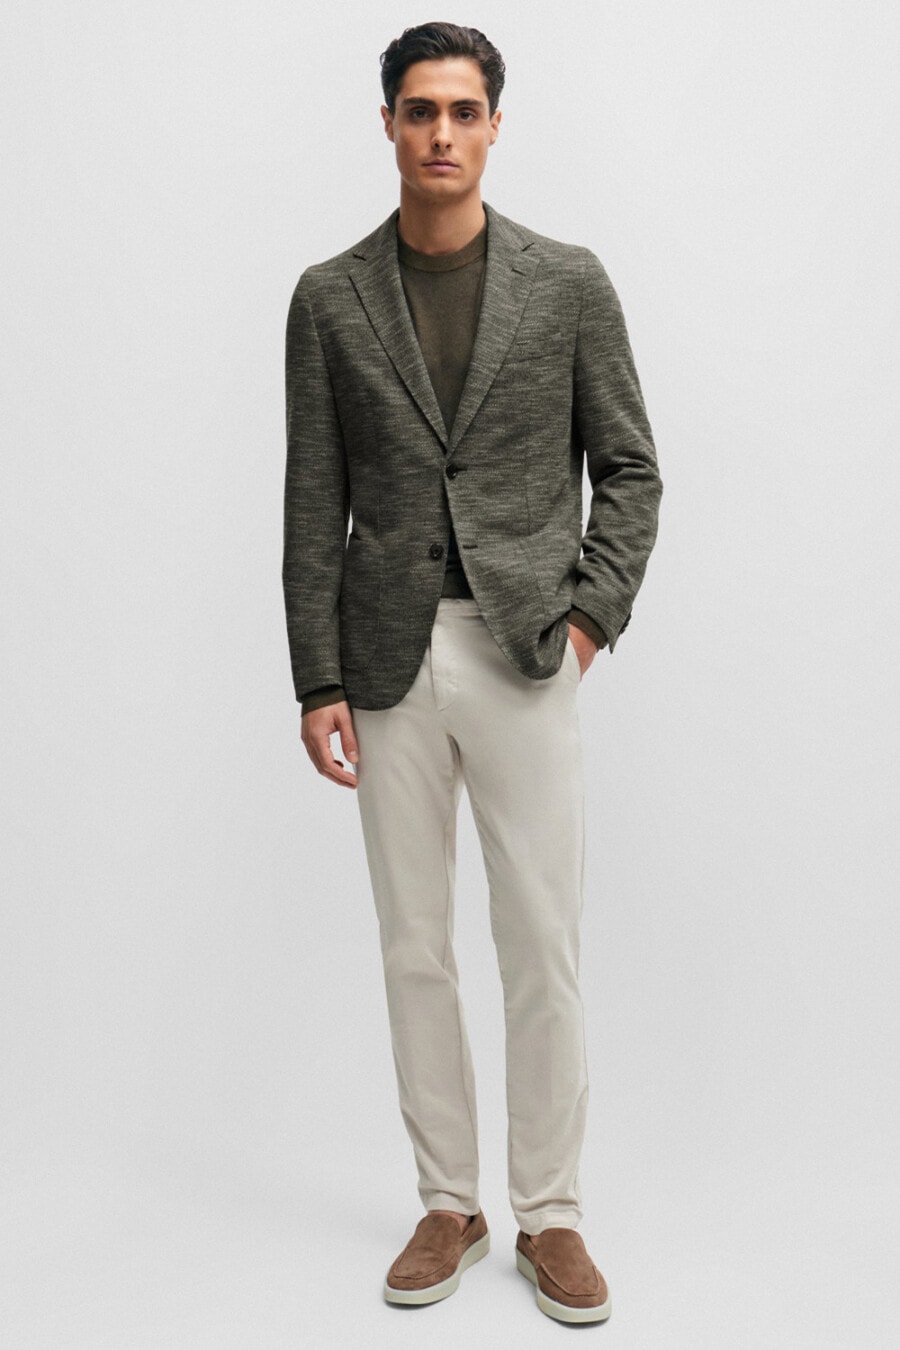 Men's off white chinos, moss green T-shirt, green-grey blazer and brown suede loafers outfit